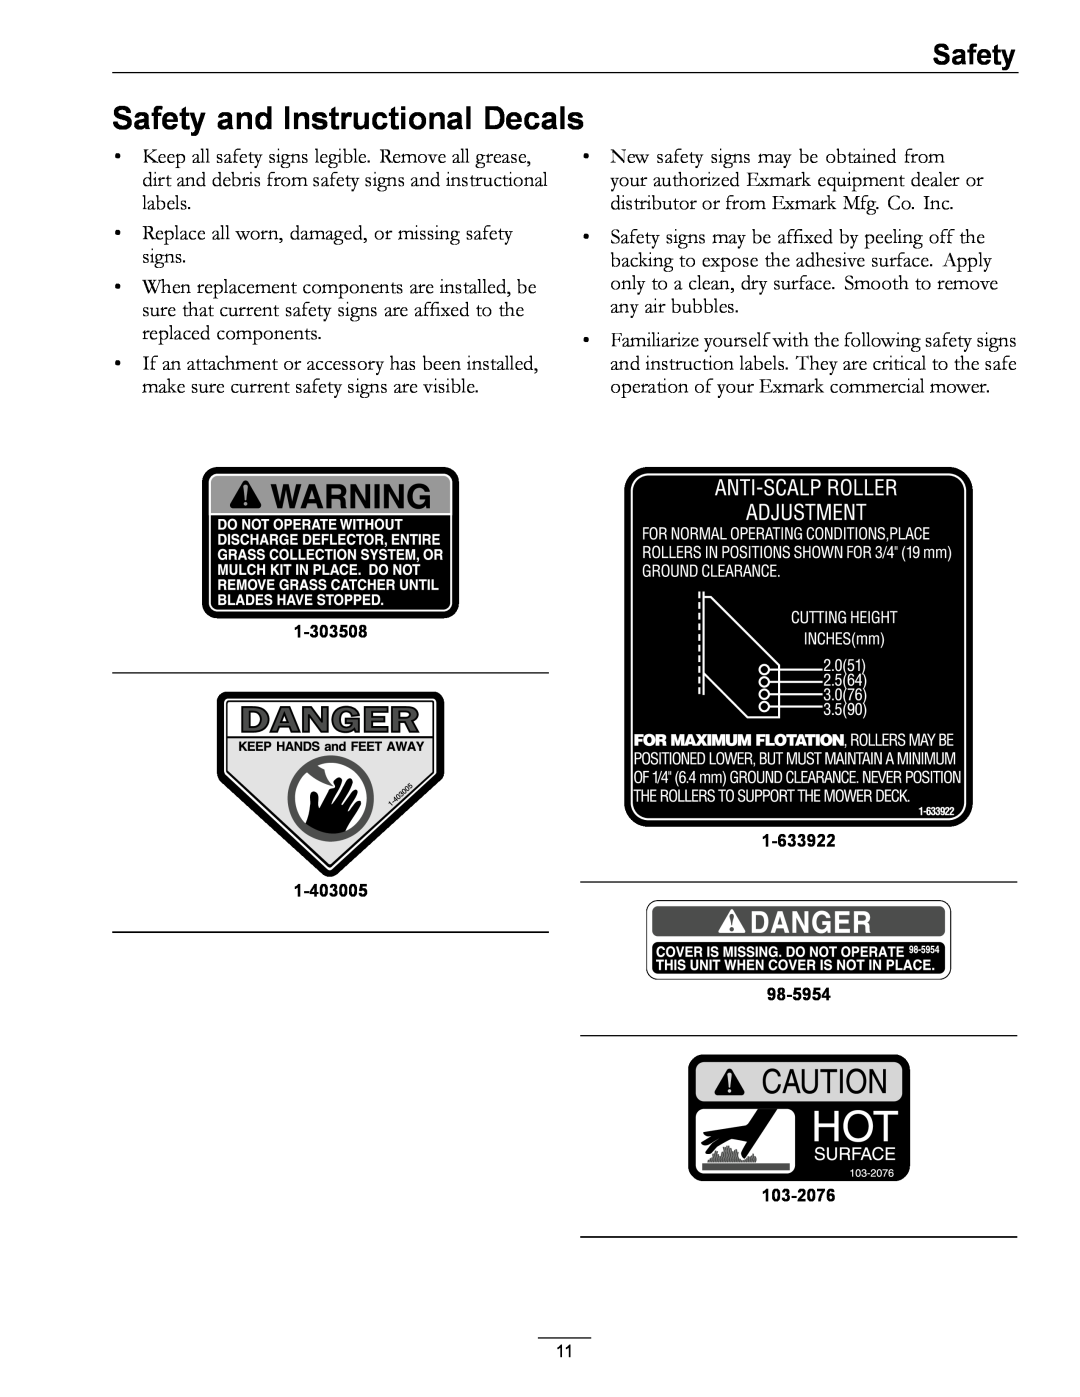 Exmark 4500-872 manual Safety and Instructional Decals 